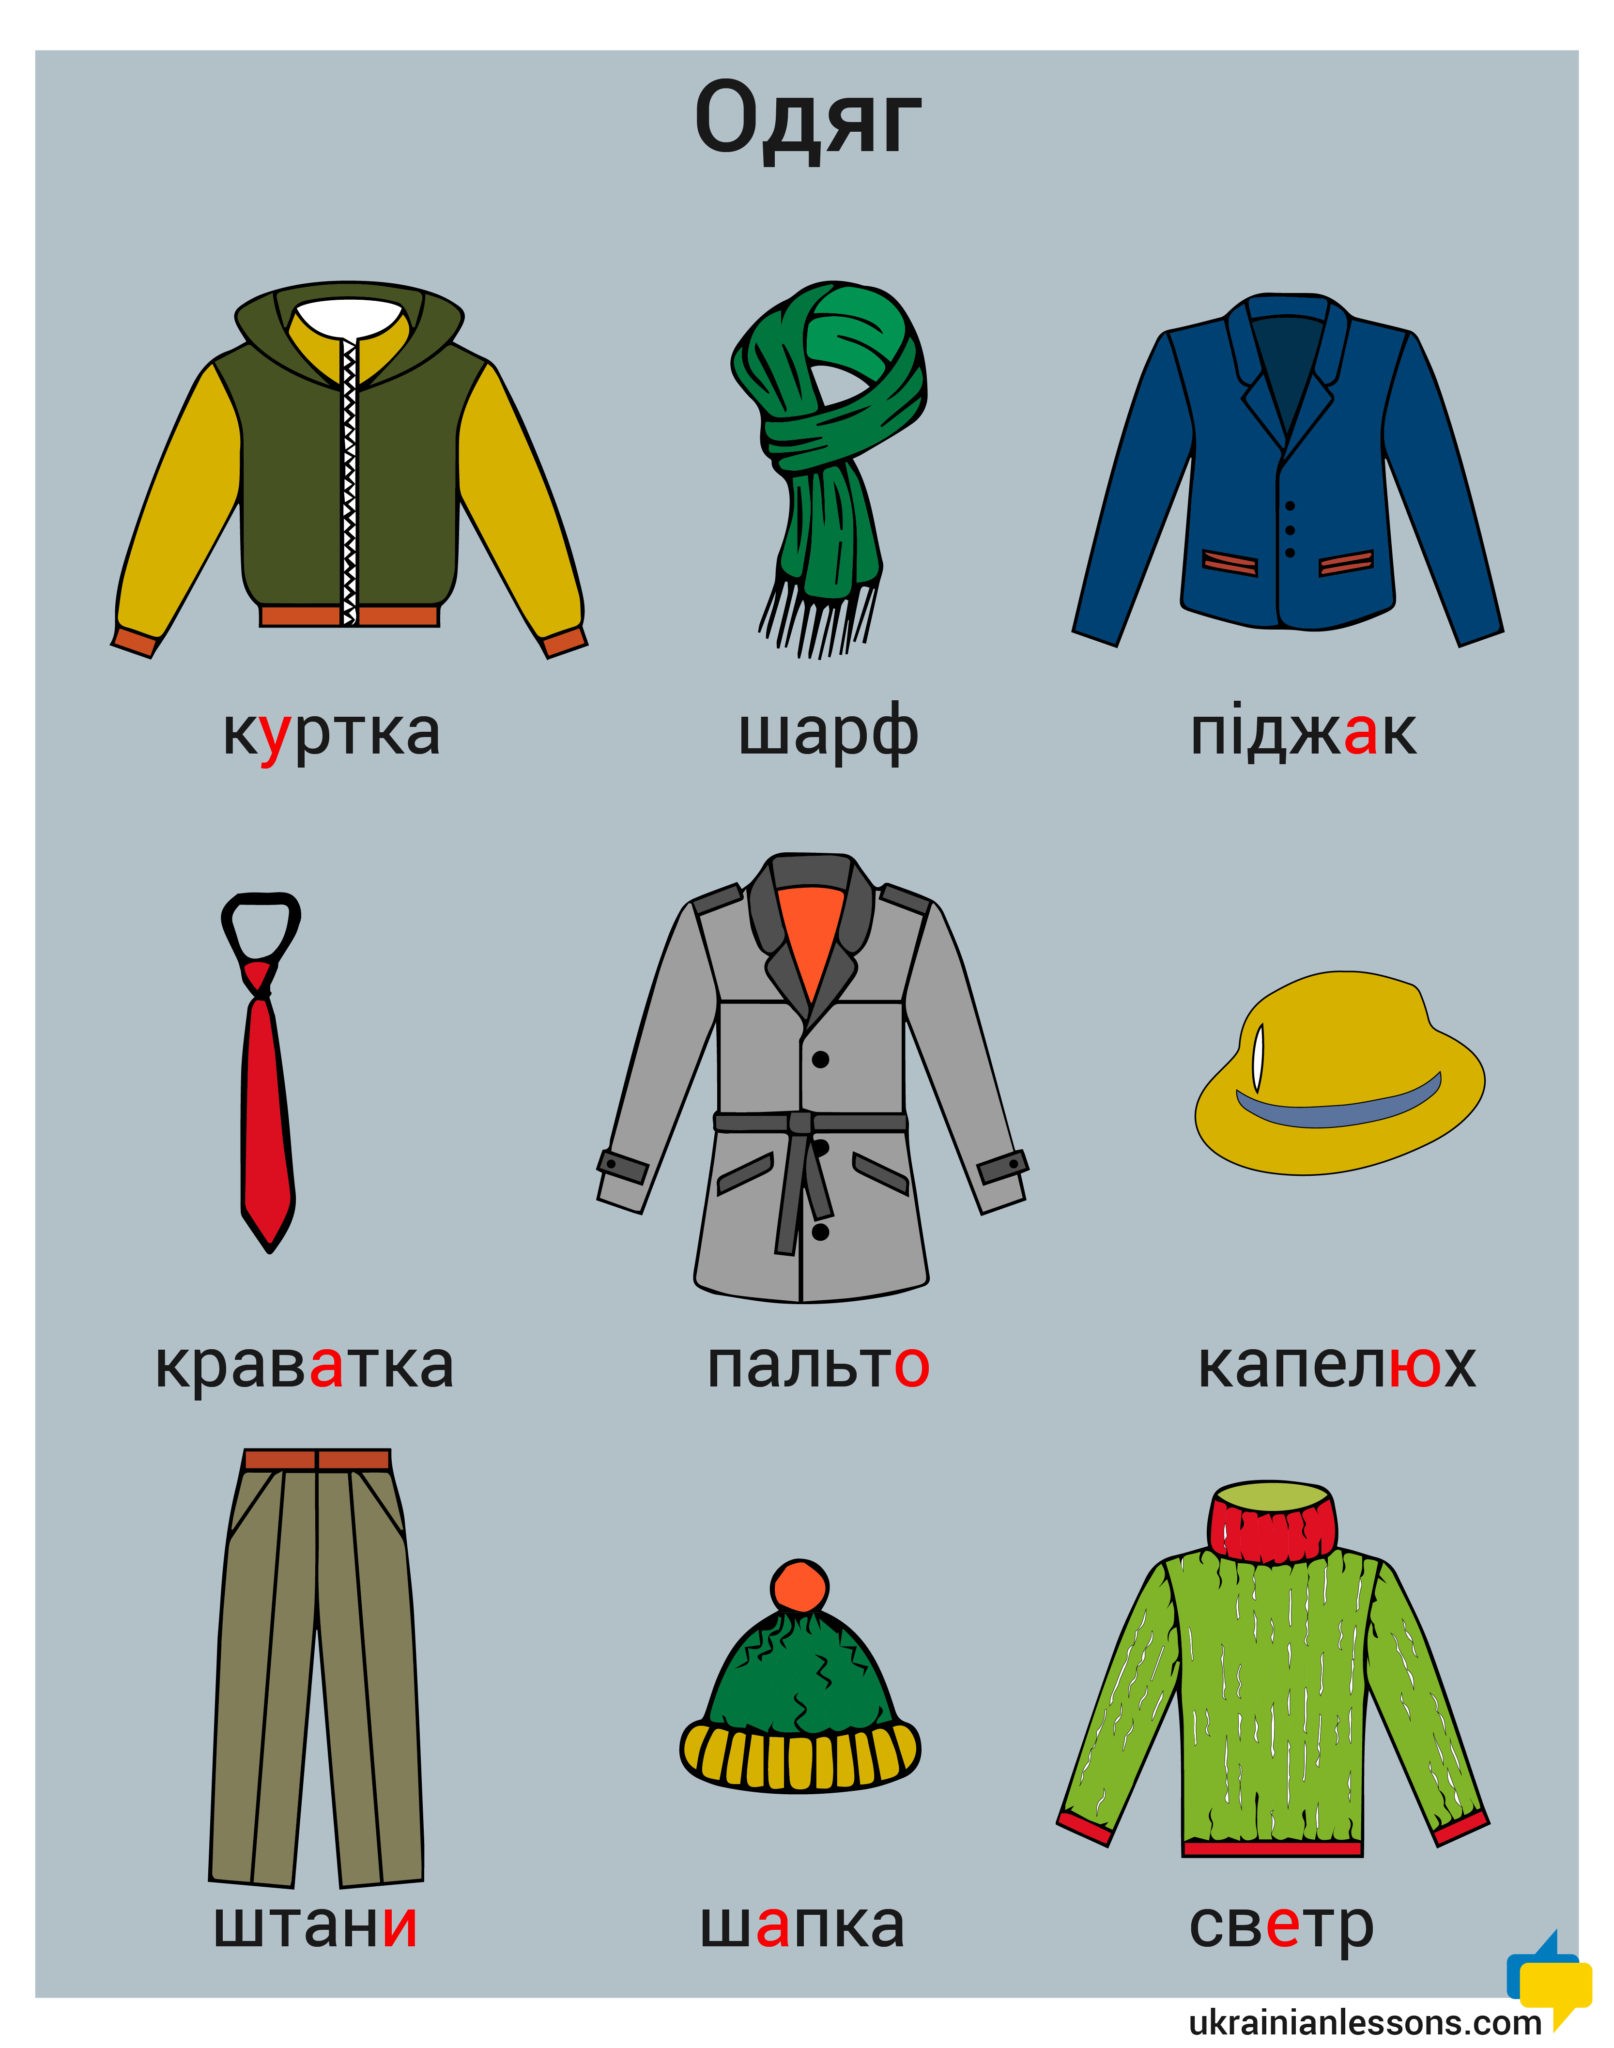 Одяг — Clothes Vocabulary in Ukrainian (with Illustrations and